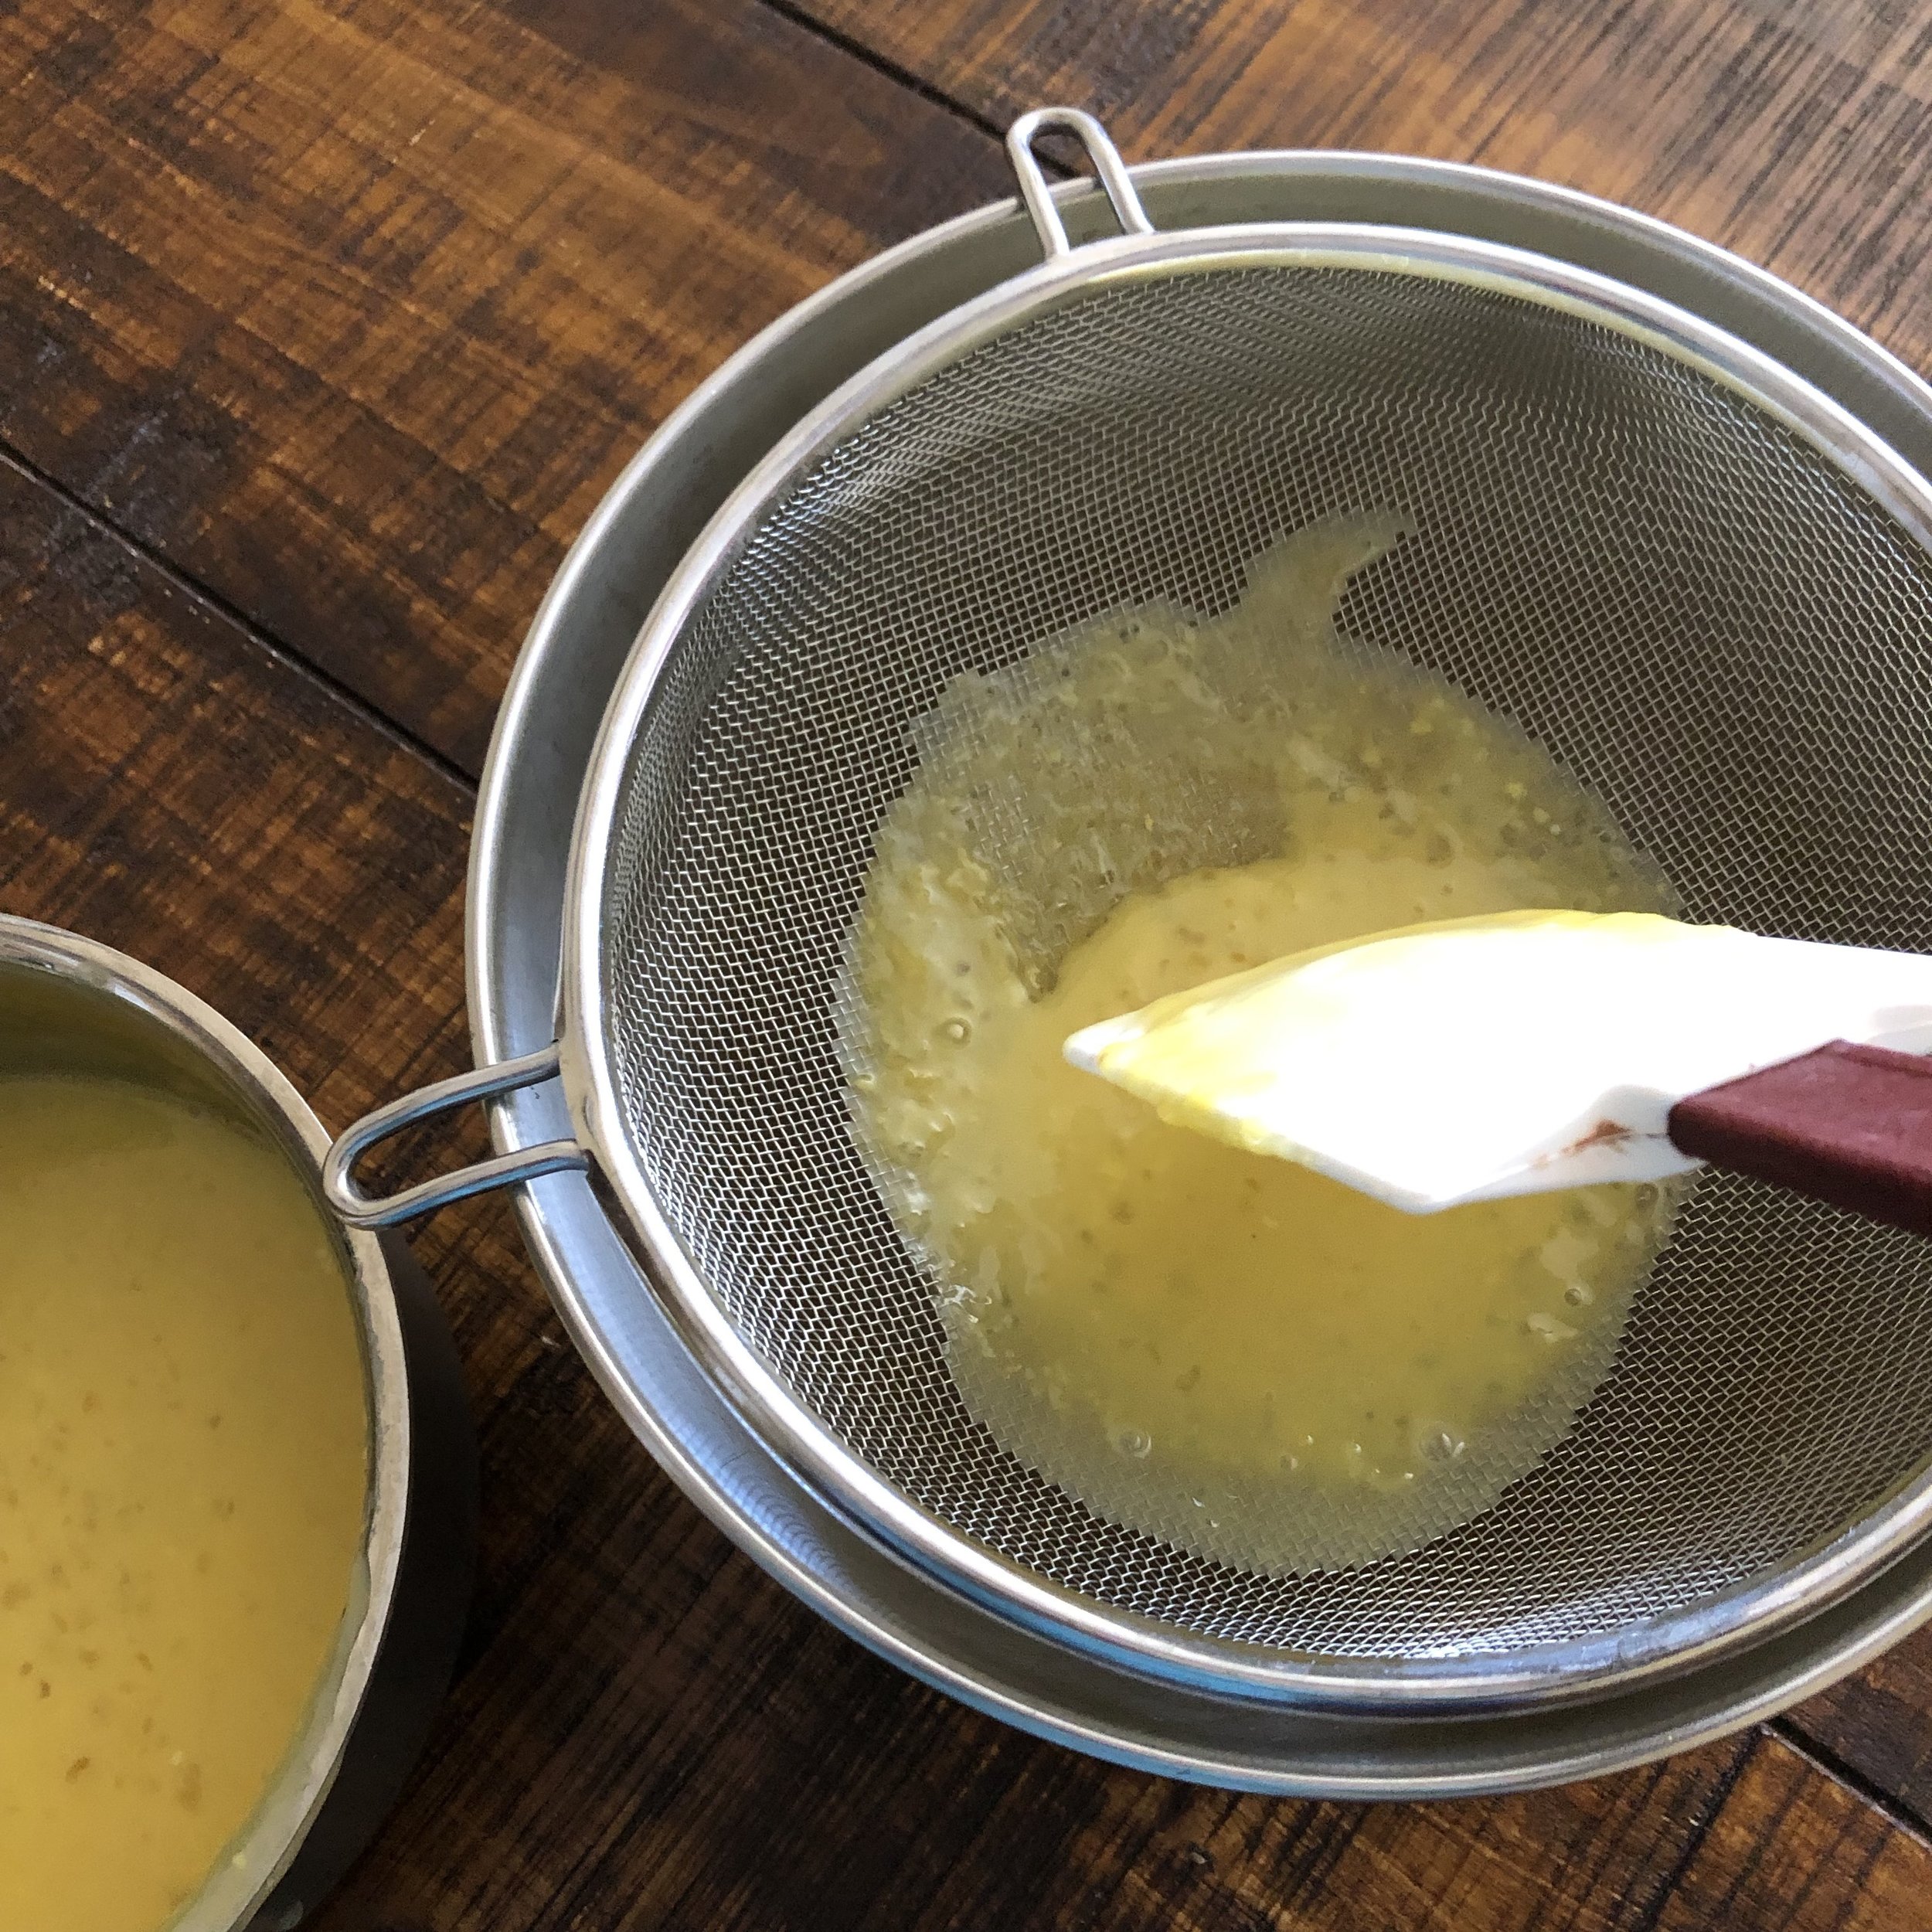  Strain the liquid through a mess strainer to remove any tapioca lumps, eggs bits, and large pieces of lemon zest. Use a rubber spatula to gently press it through. 